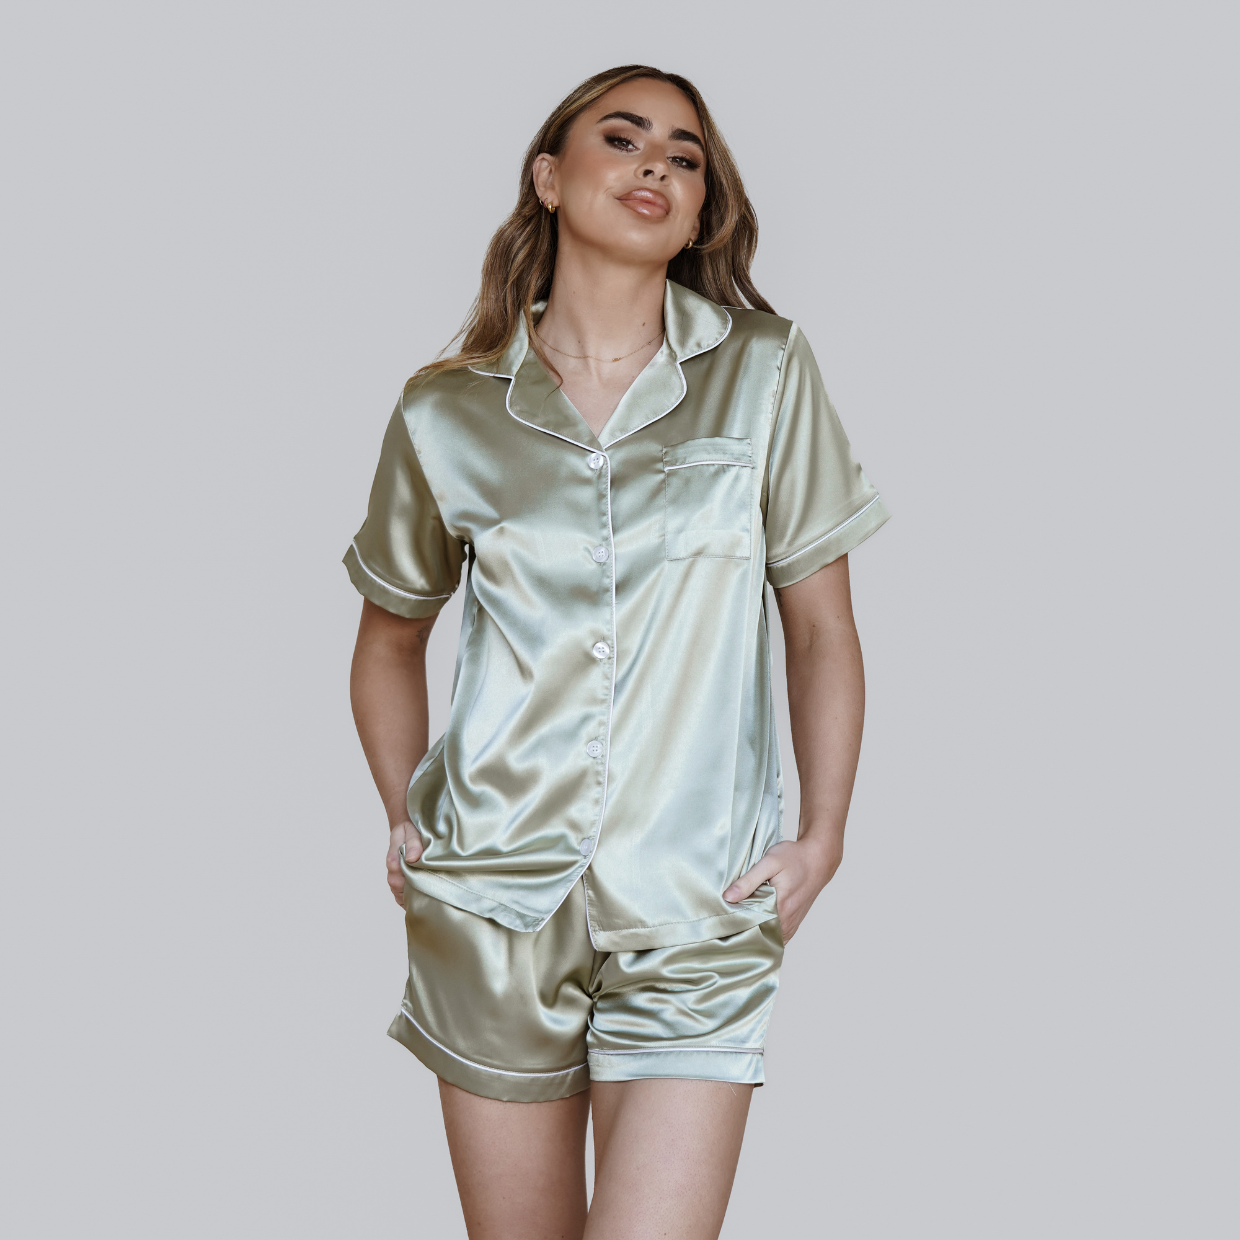 Short Sleeve Pyjamas in Dusty Sage with White Piping